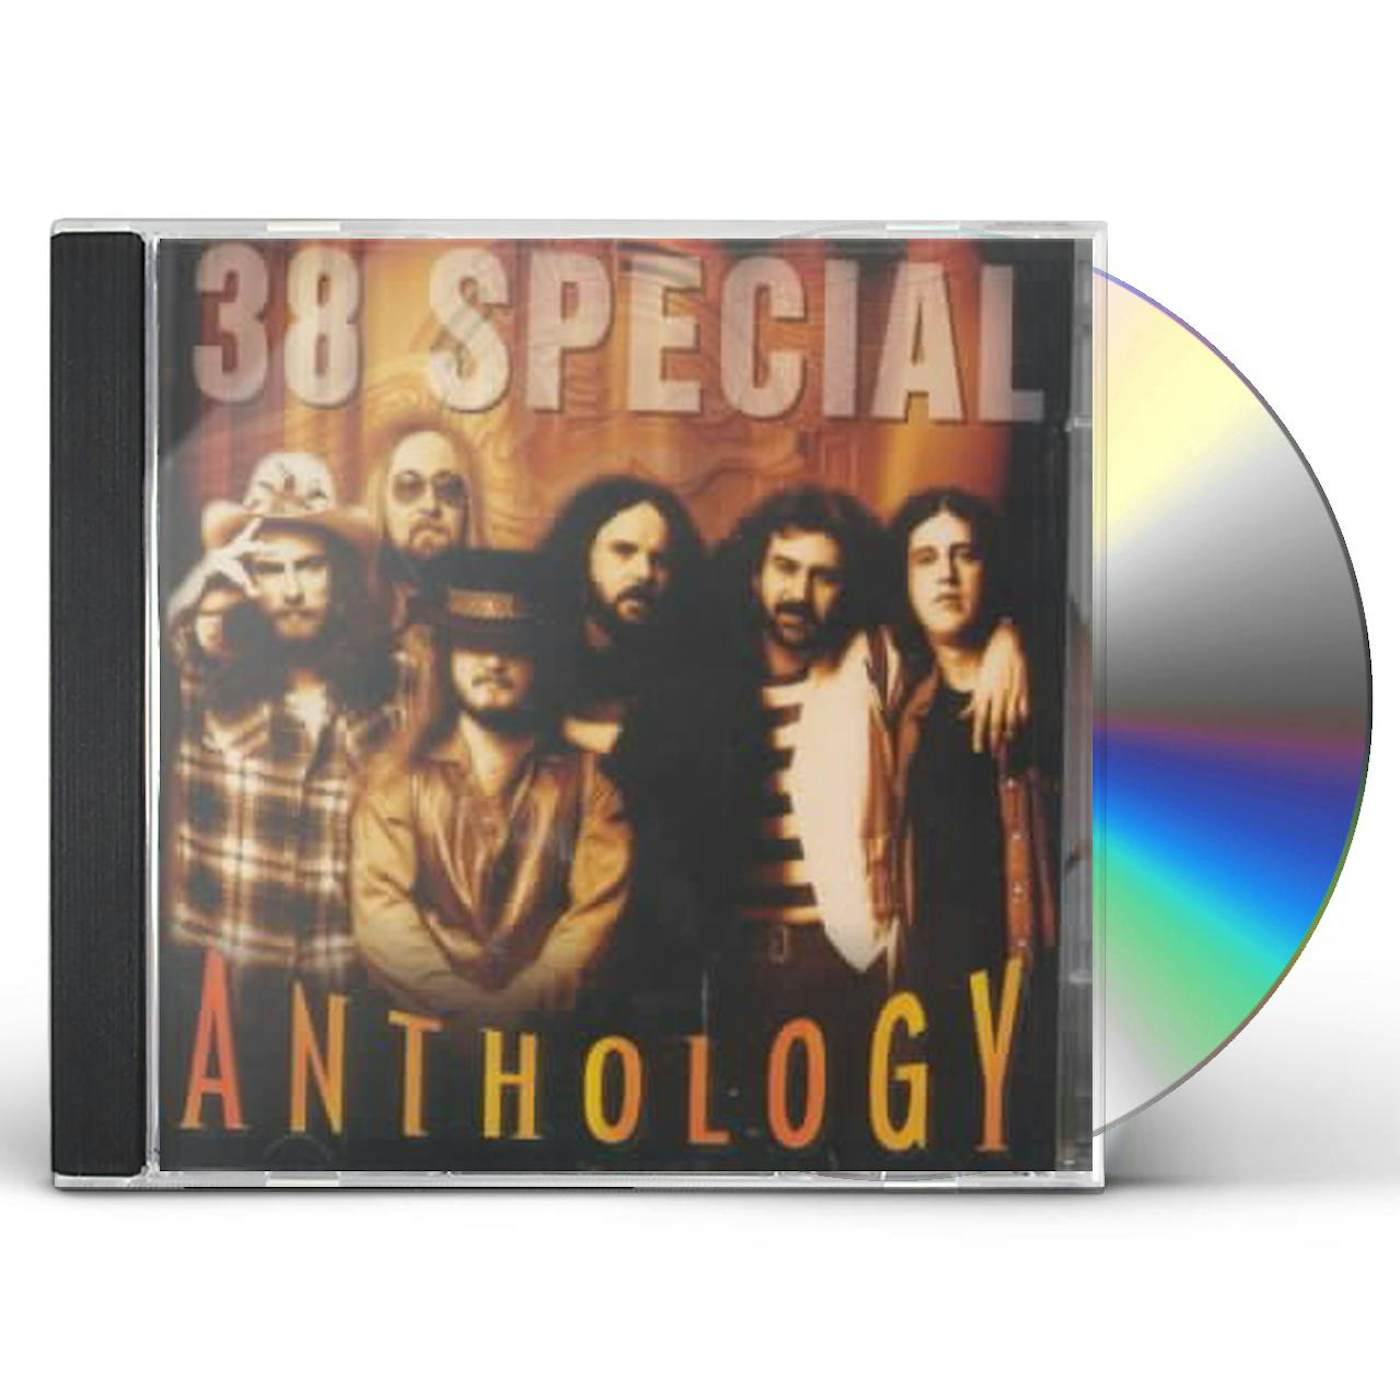 38 Special ANTHOLOGY CD